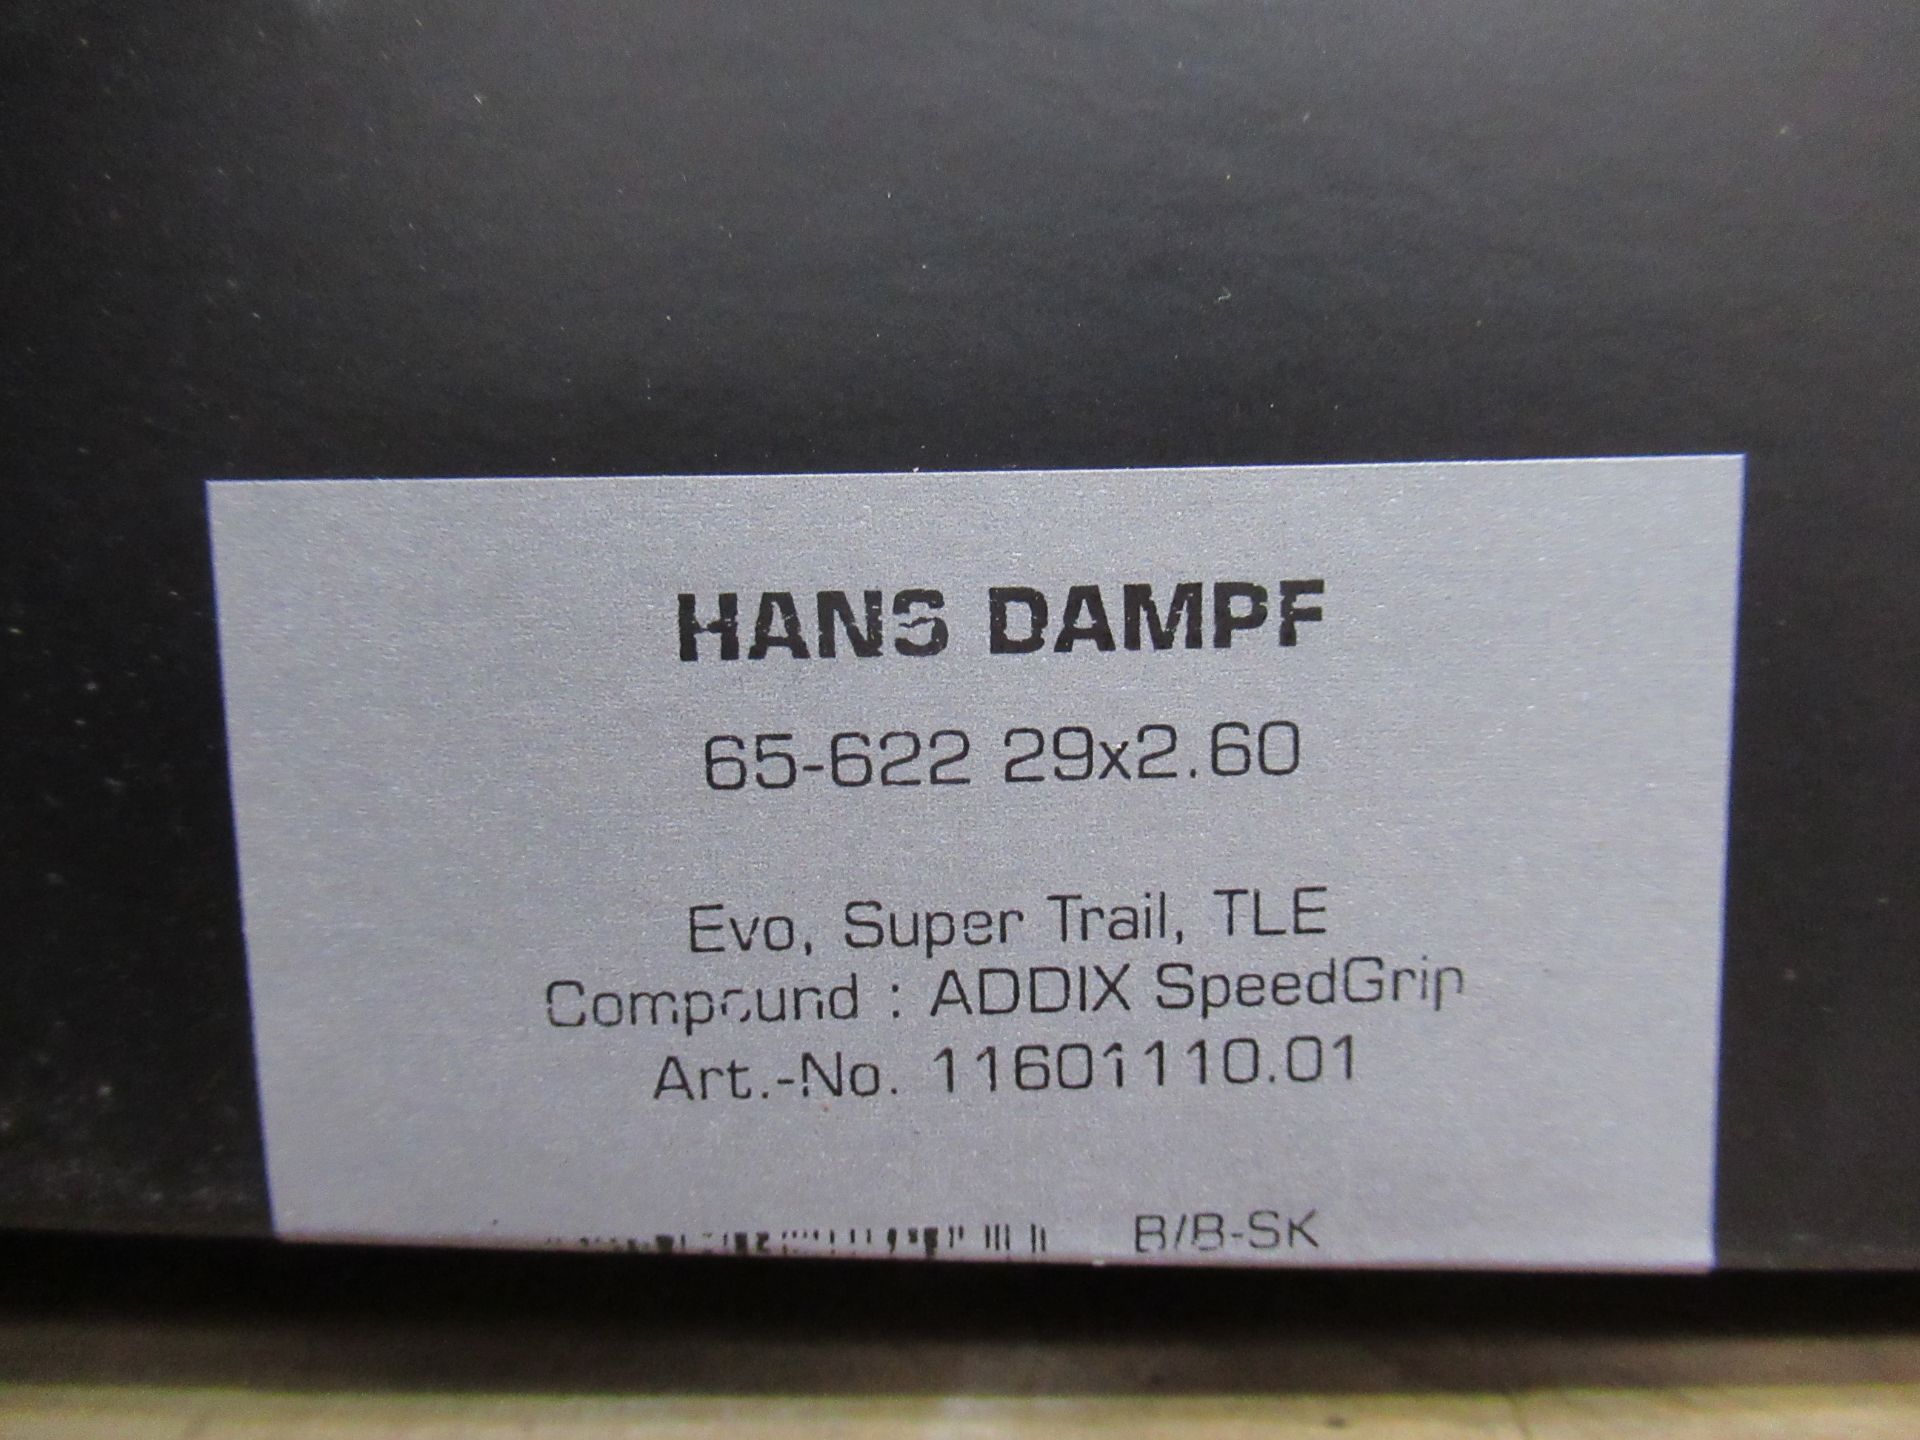 3 x Schwalbe 29x2.60 tyres: 1 x Hans Dampf (RRP£66.99) and 2 x Smart Sam (RRP£47.99 each) - Image 5 of 7